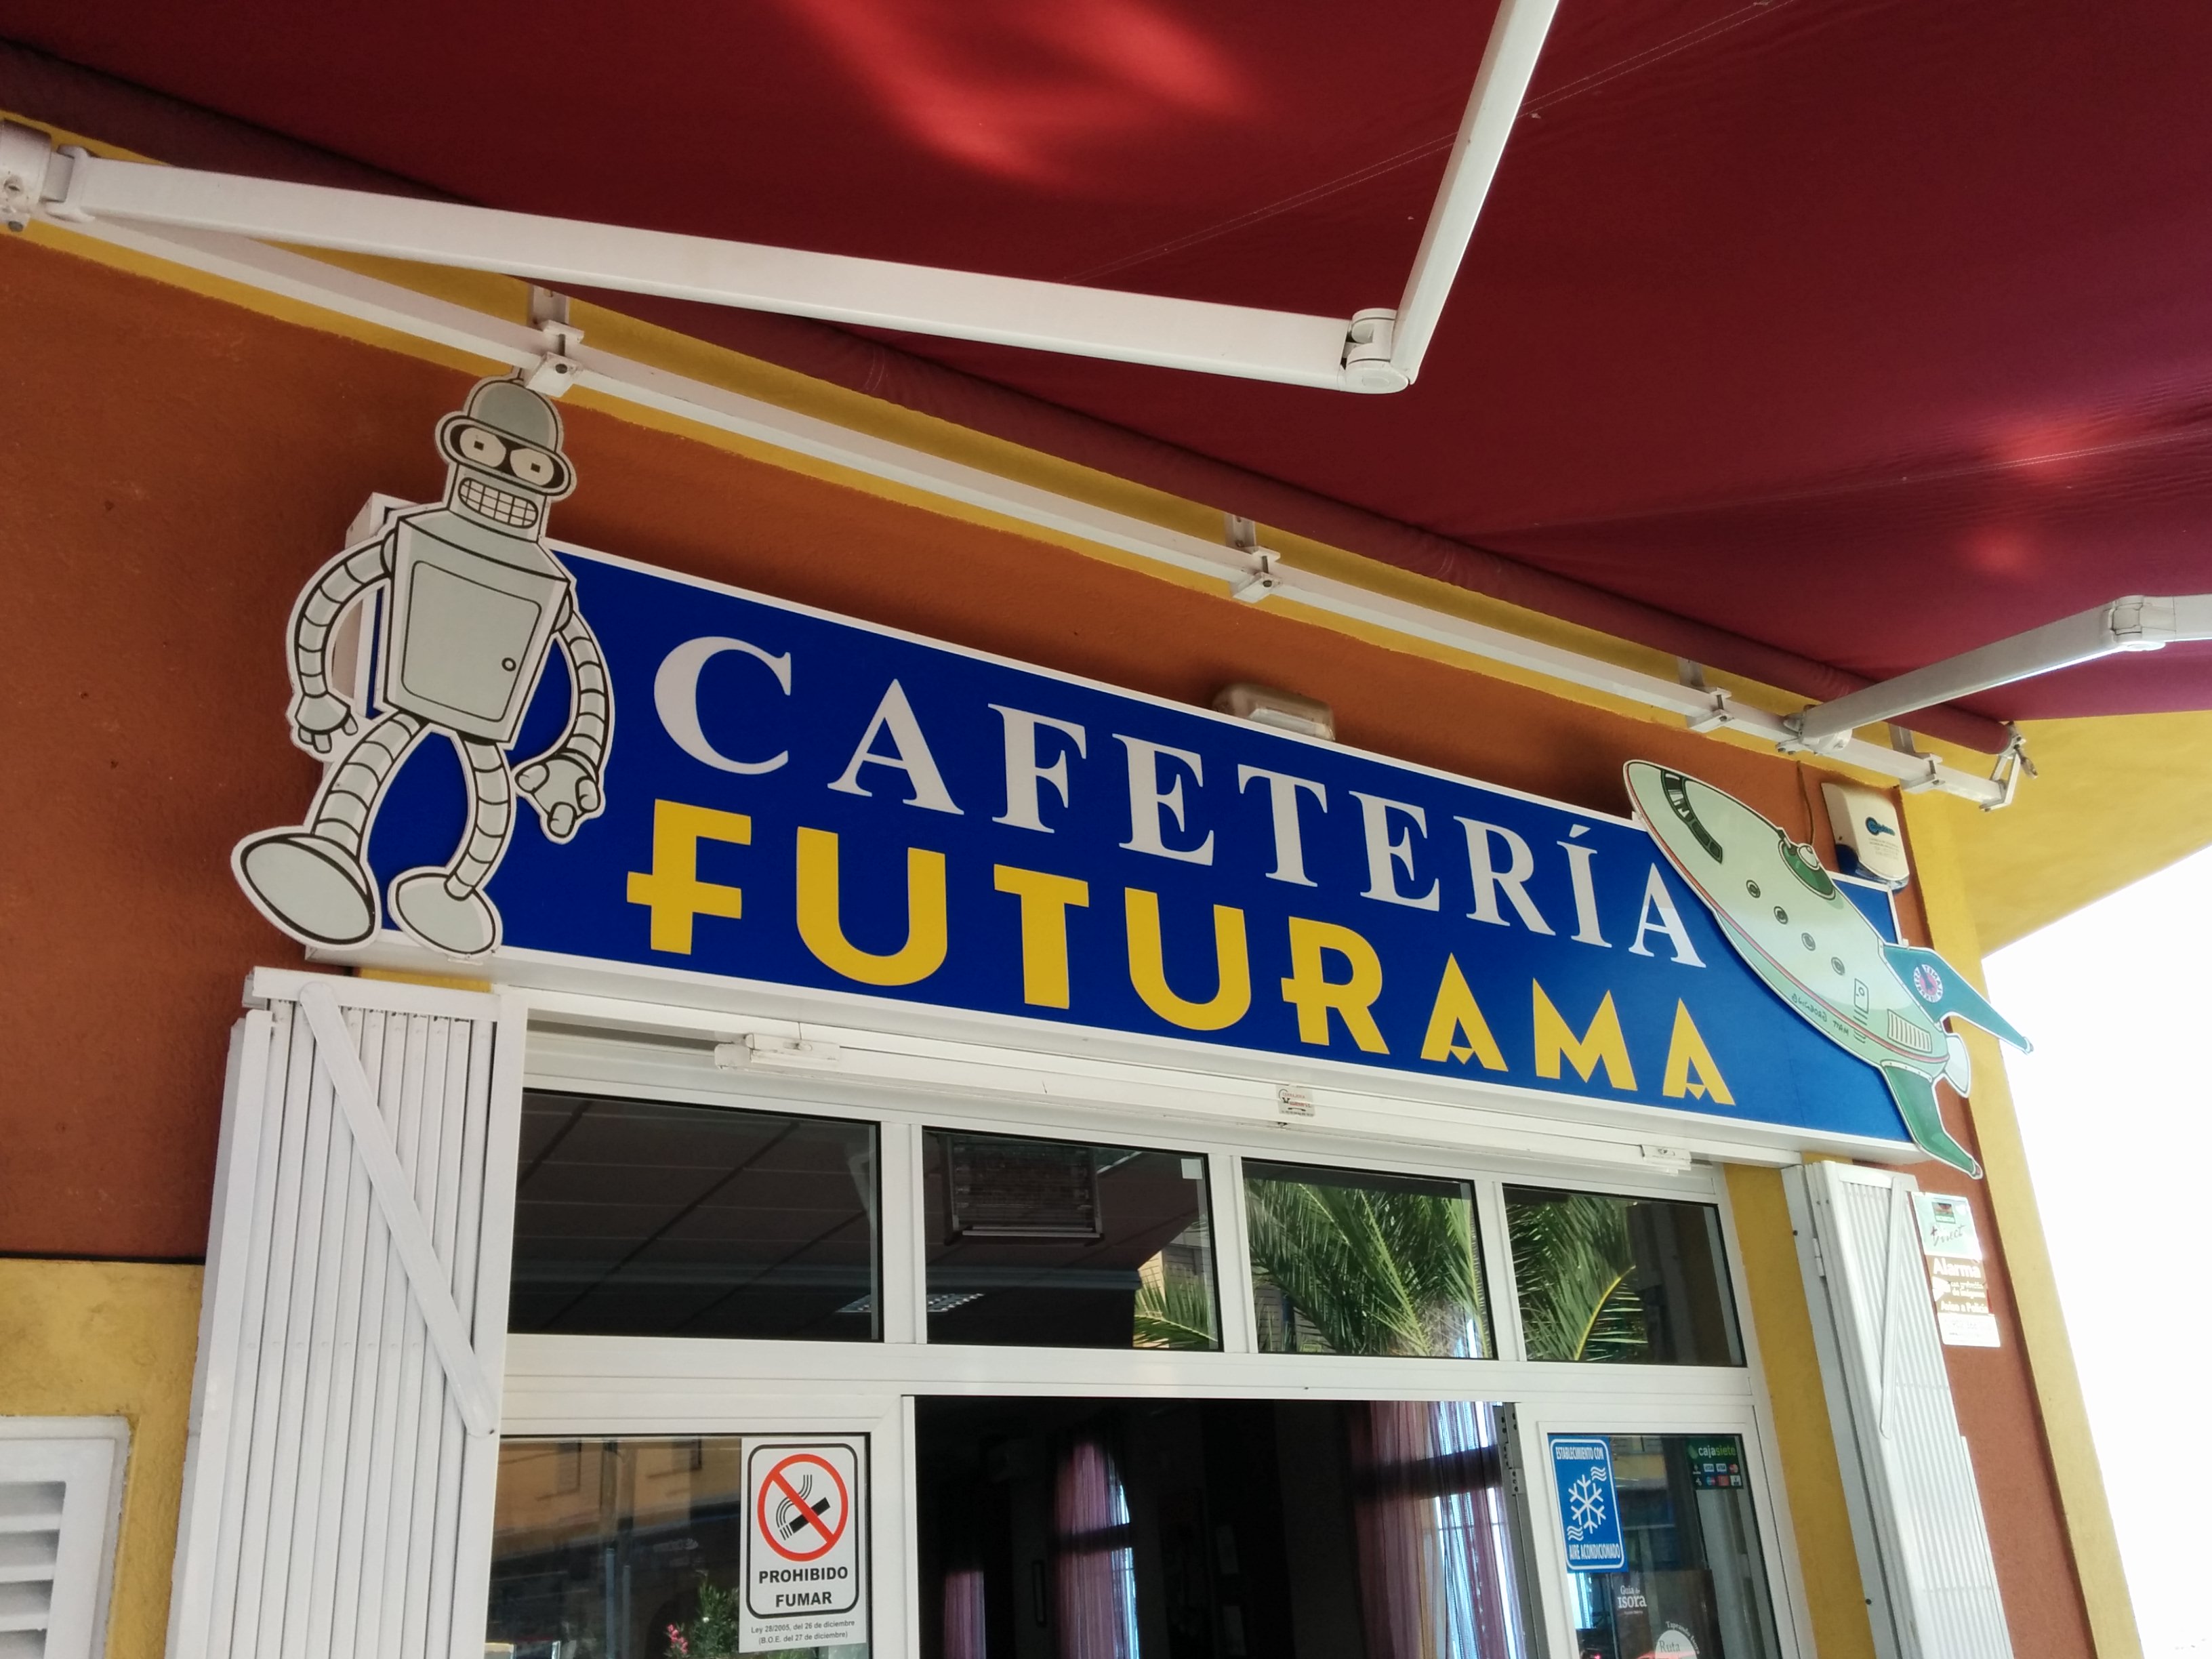 He stops and there's a real Futurama Pizza place.